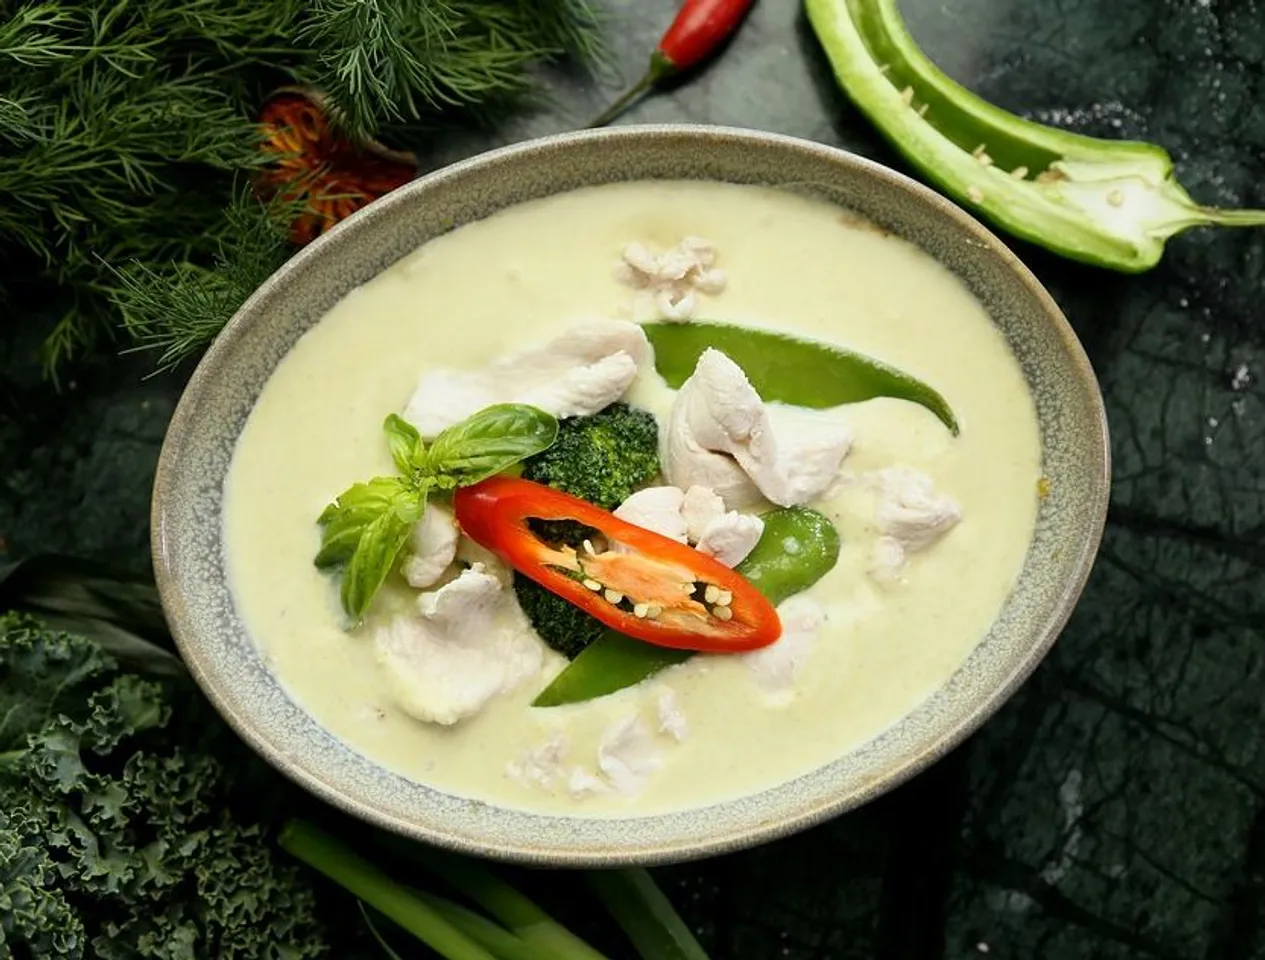 Here is everything you need to know about Thai Curry